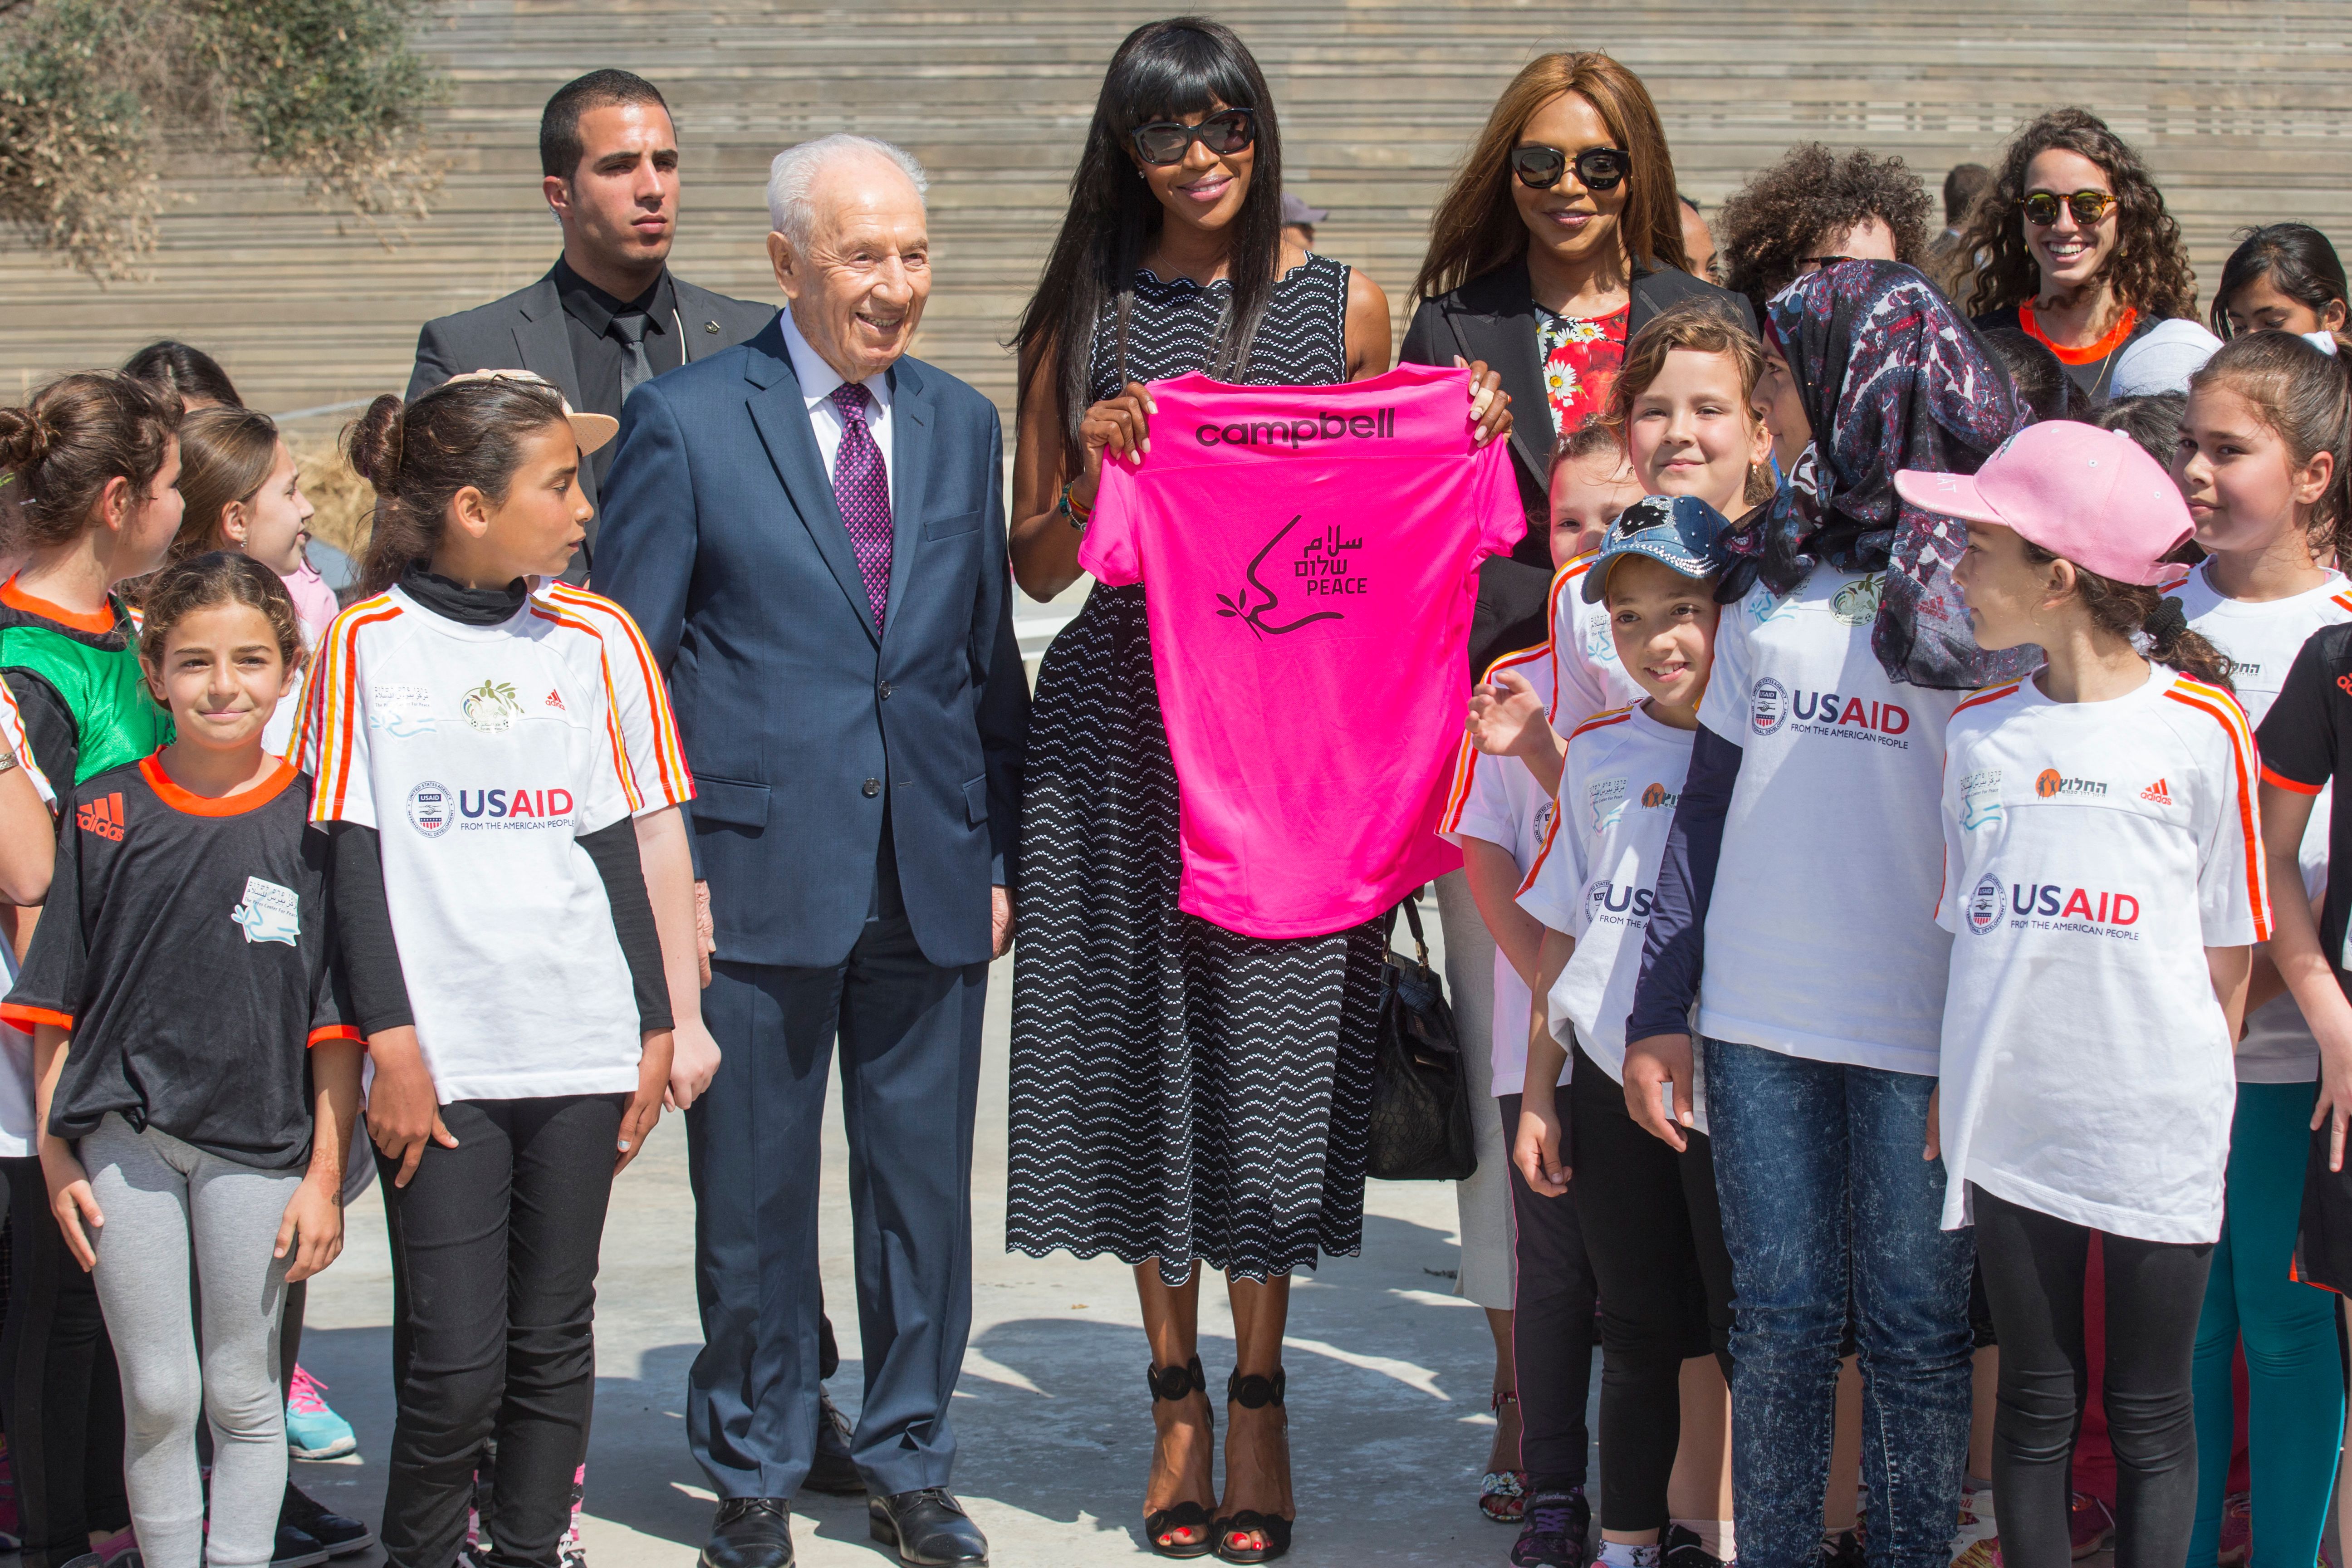 (L-R) Former Israeli president Shimon Peres, Naomi Campbell and her mother Valerie Morris during a meeting with children at the Peres Center for Peace on March 8, 2016 in Tel Aviv | Source: Getty Images